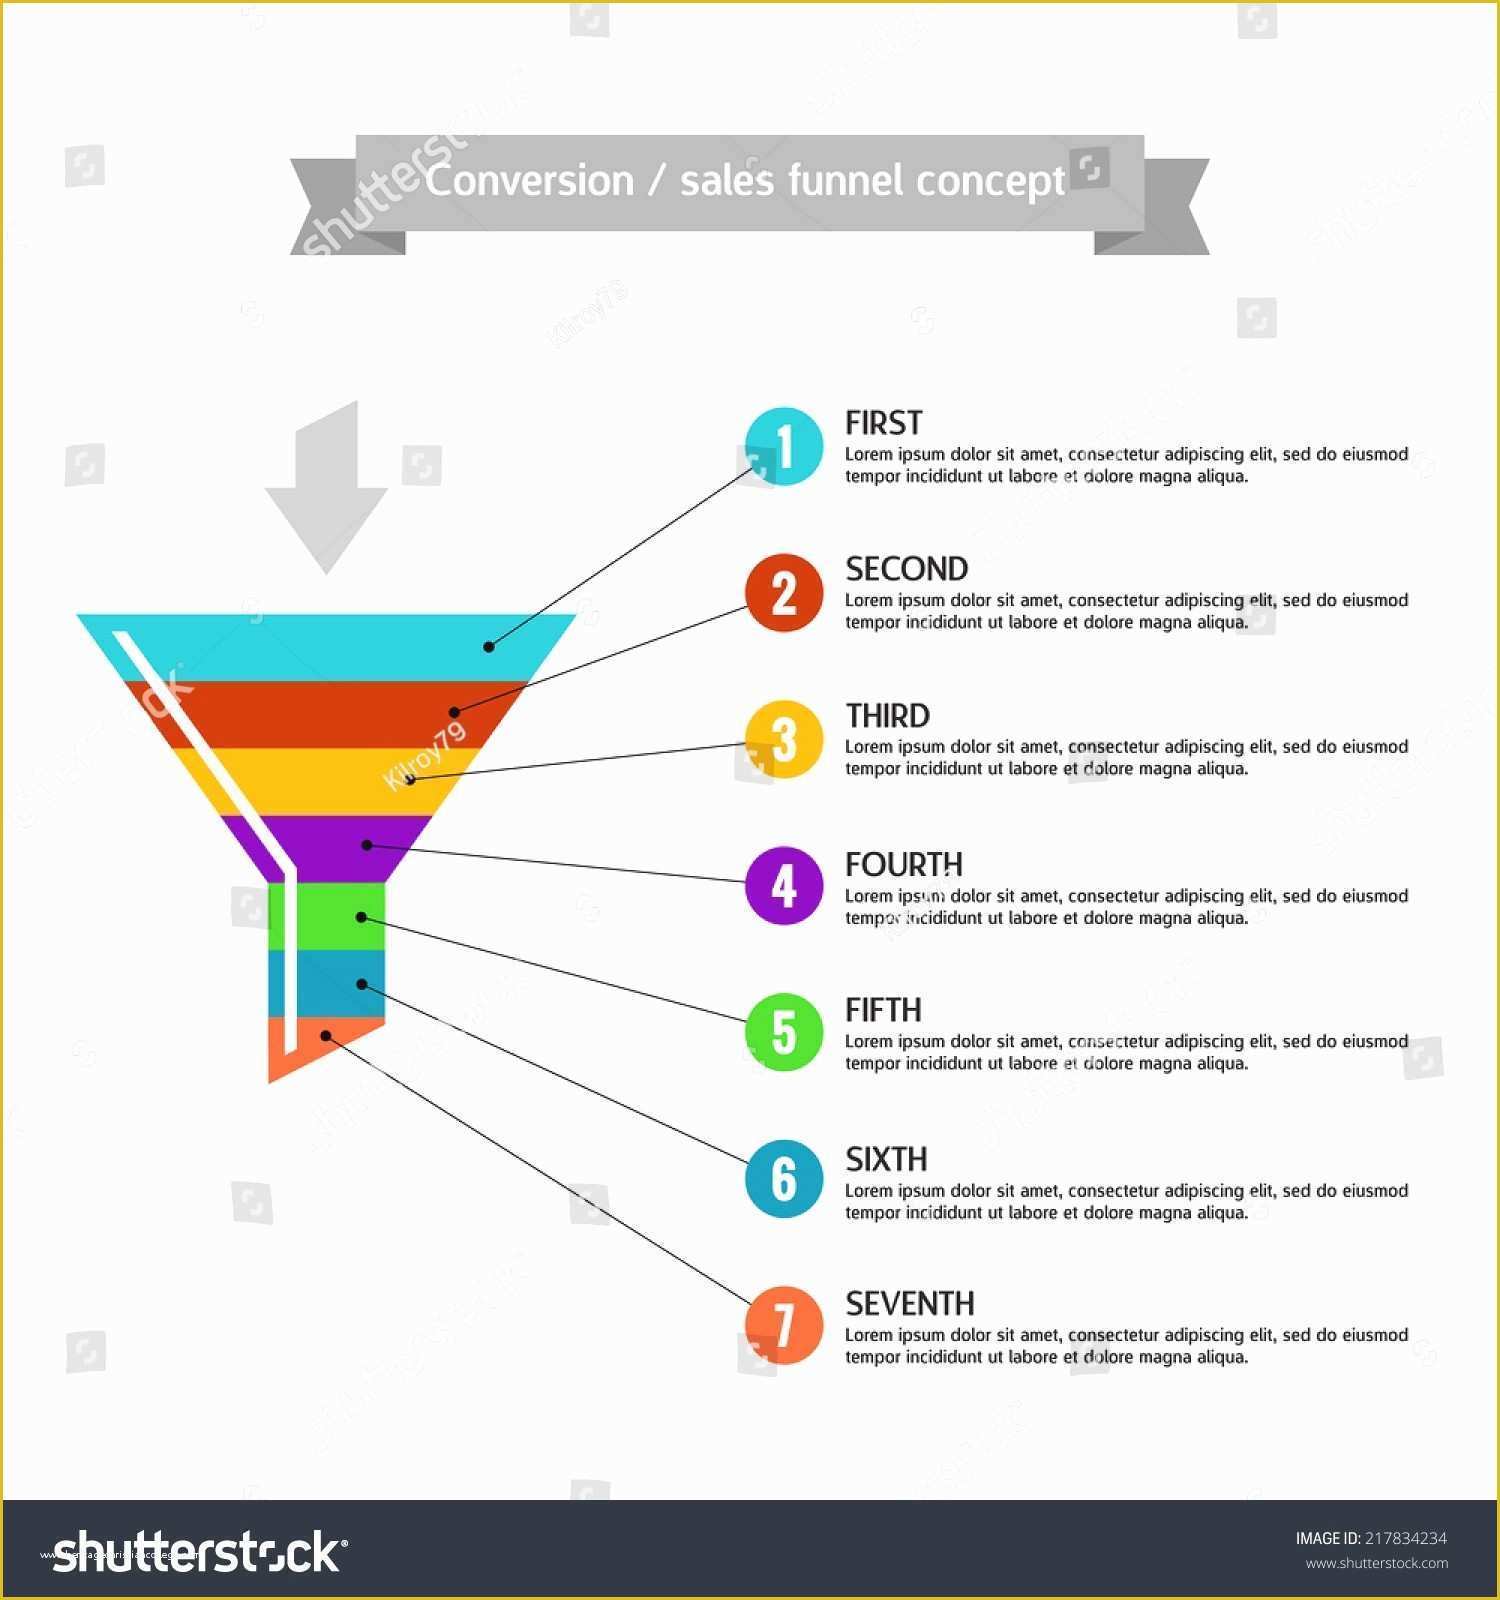 Free Marketing Funnel Template Of Best Marketing Funnel Template Free